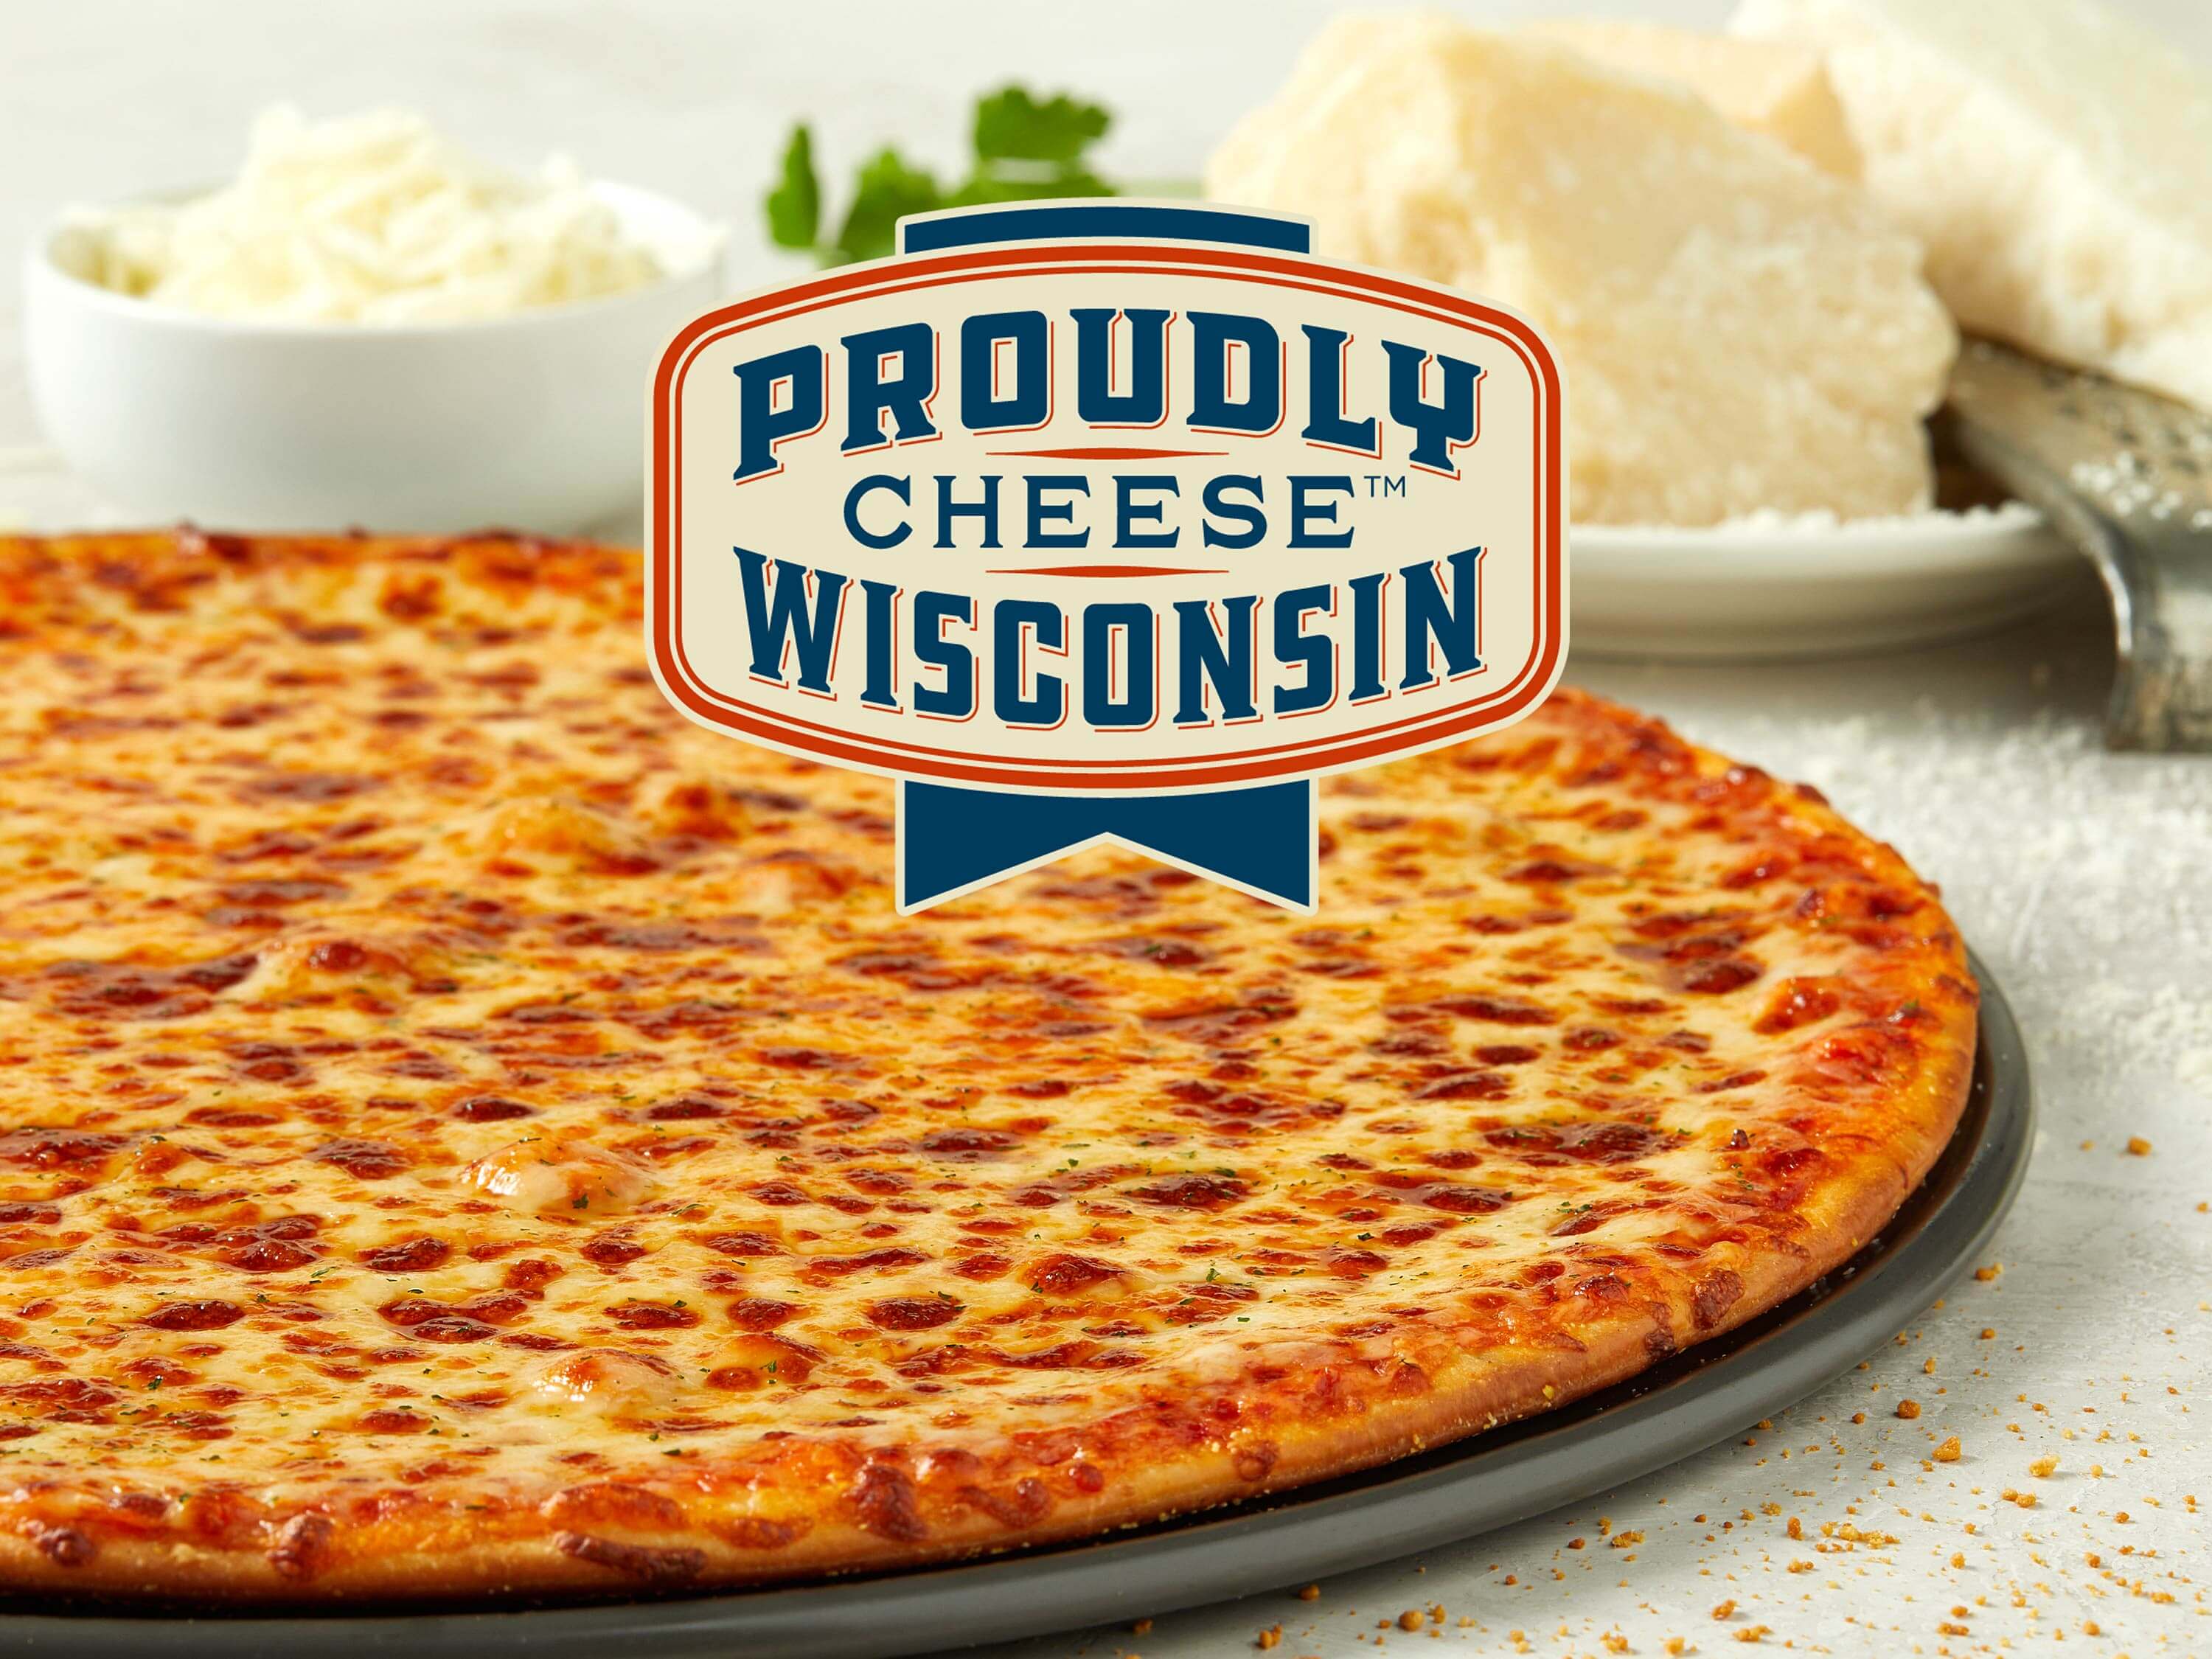 Serious Cheese™ Pizza: Loaded Edge to Edge® with real aged smoked Wisconsin Provolone cheese.